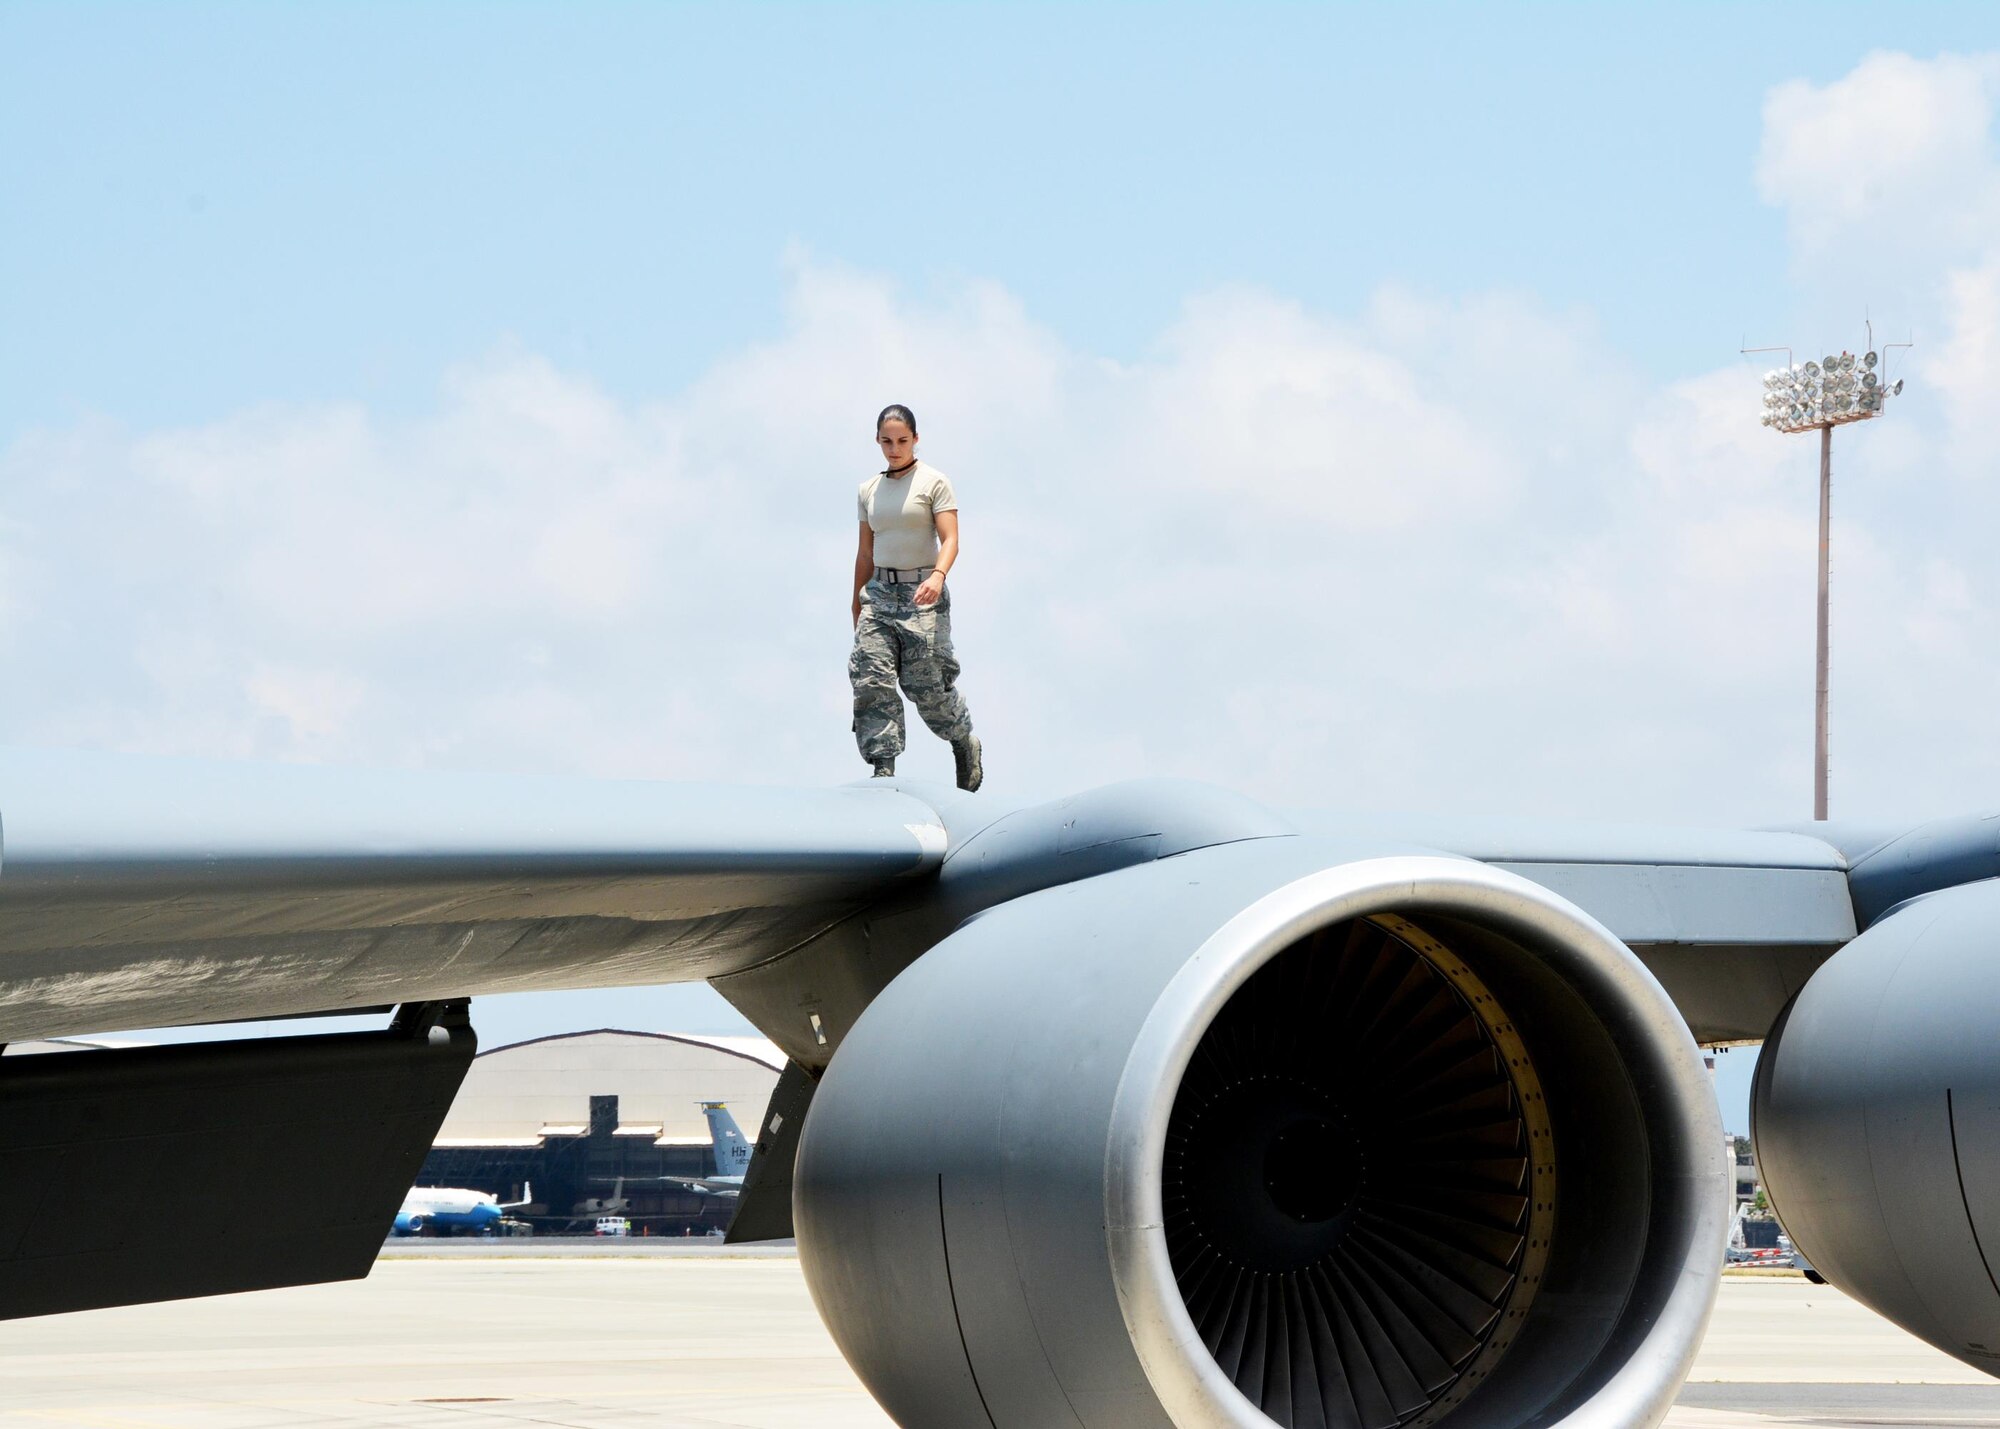 160917-EW270-084 JOINT BASE PEARL HARBOR-HICKAM (July 19, 2016) U.S. Air Force Senior Airman Nathalie Hamilton, a crew chief with the 507th Maintenance Squadron at Tinker Air Force Base, Okla., walks the along a wing of a KC-135R Stratotanker as part of a thru-flight inspection during Rim of the Pacific 2016. (U.S. Air Force photo\Tech. Sgt. Lauren Gleason)